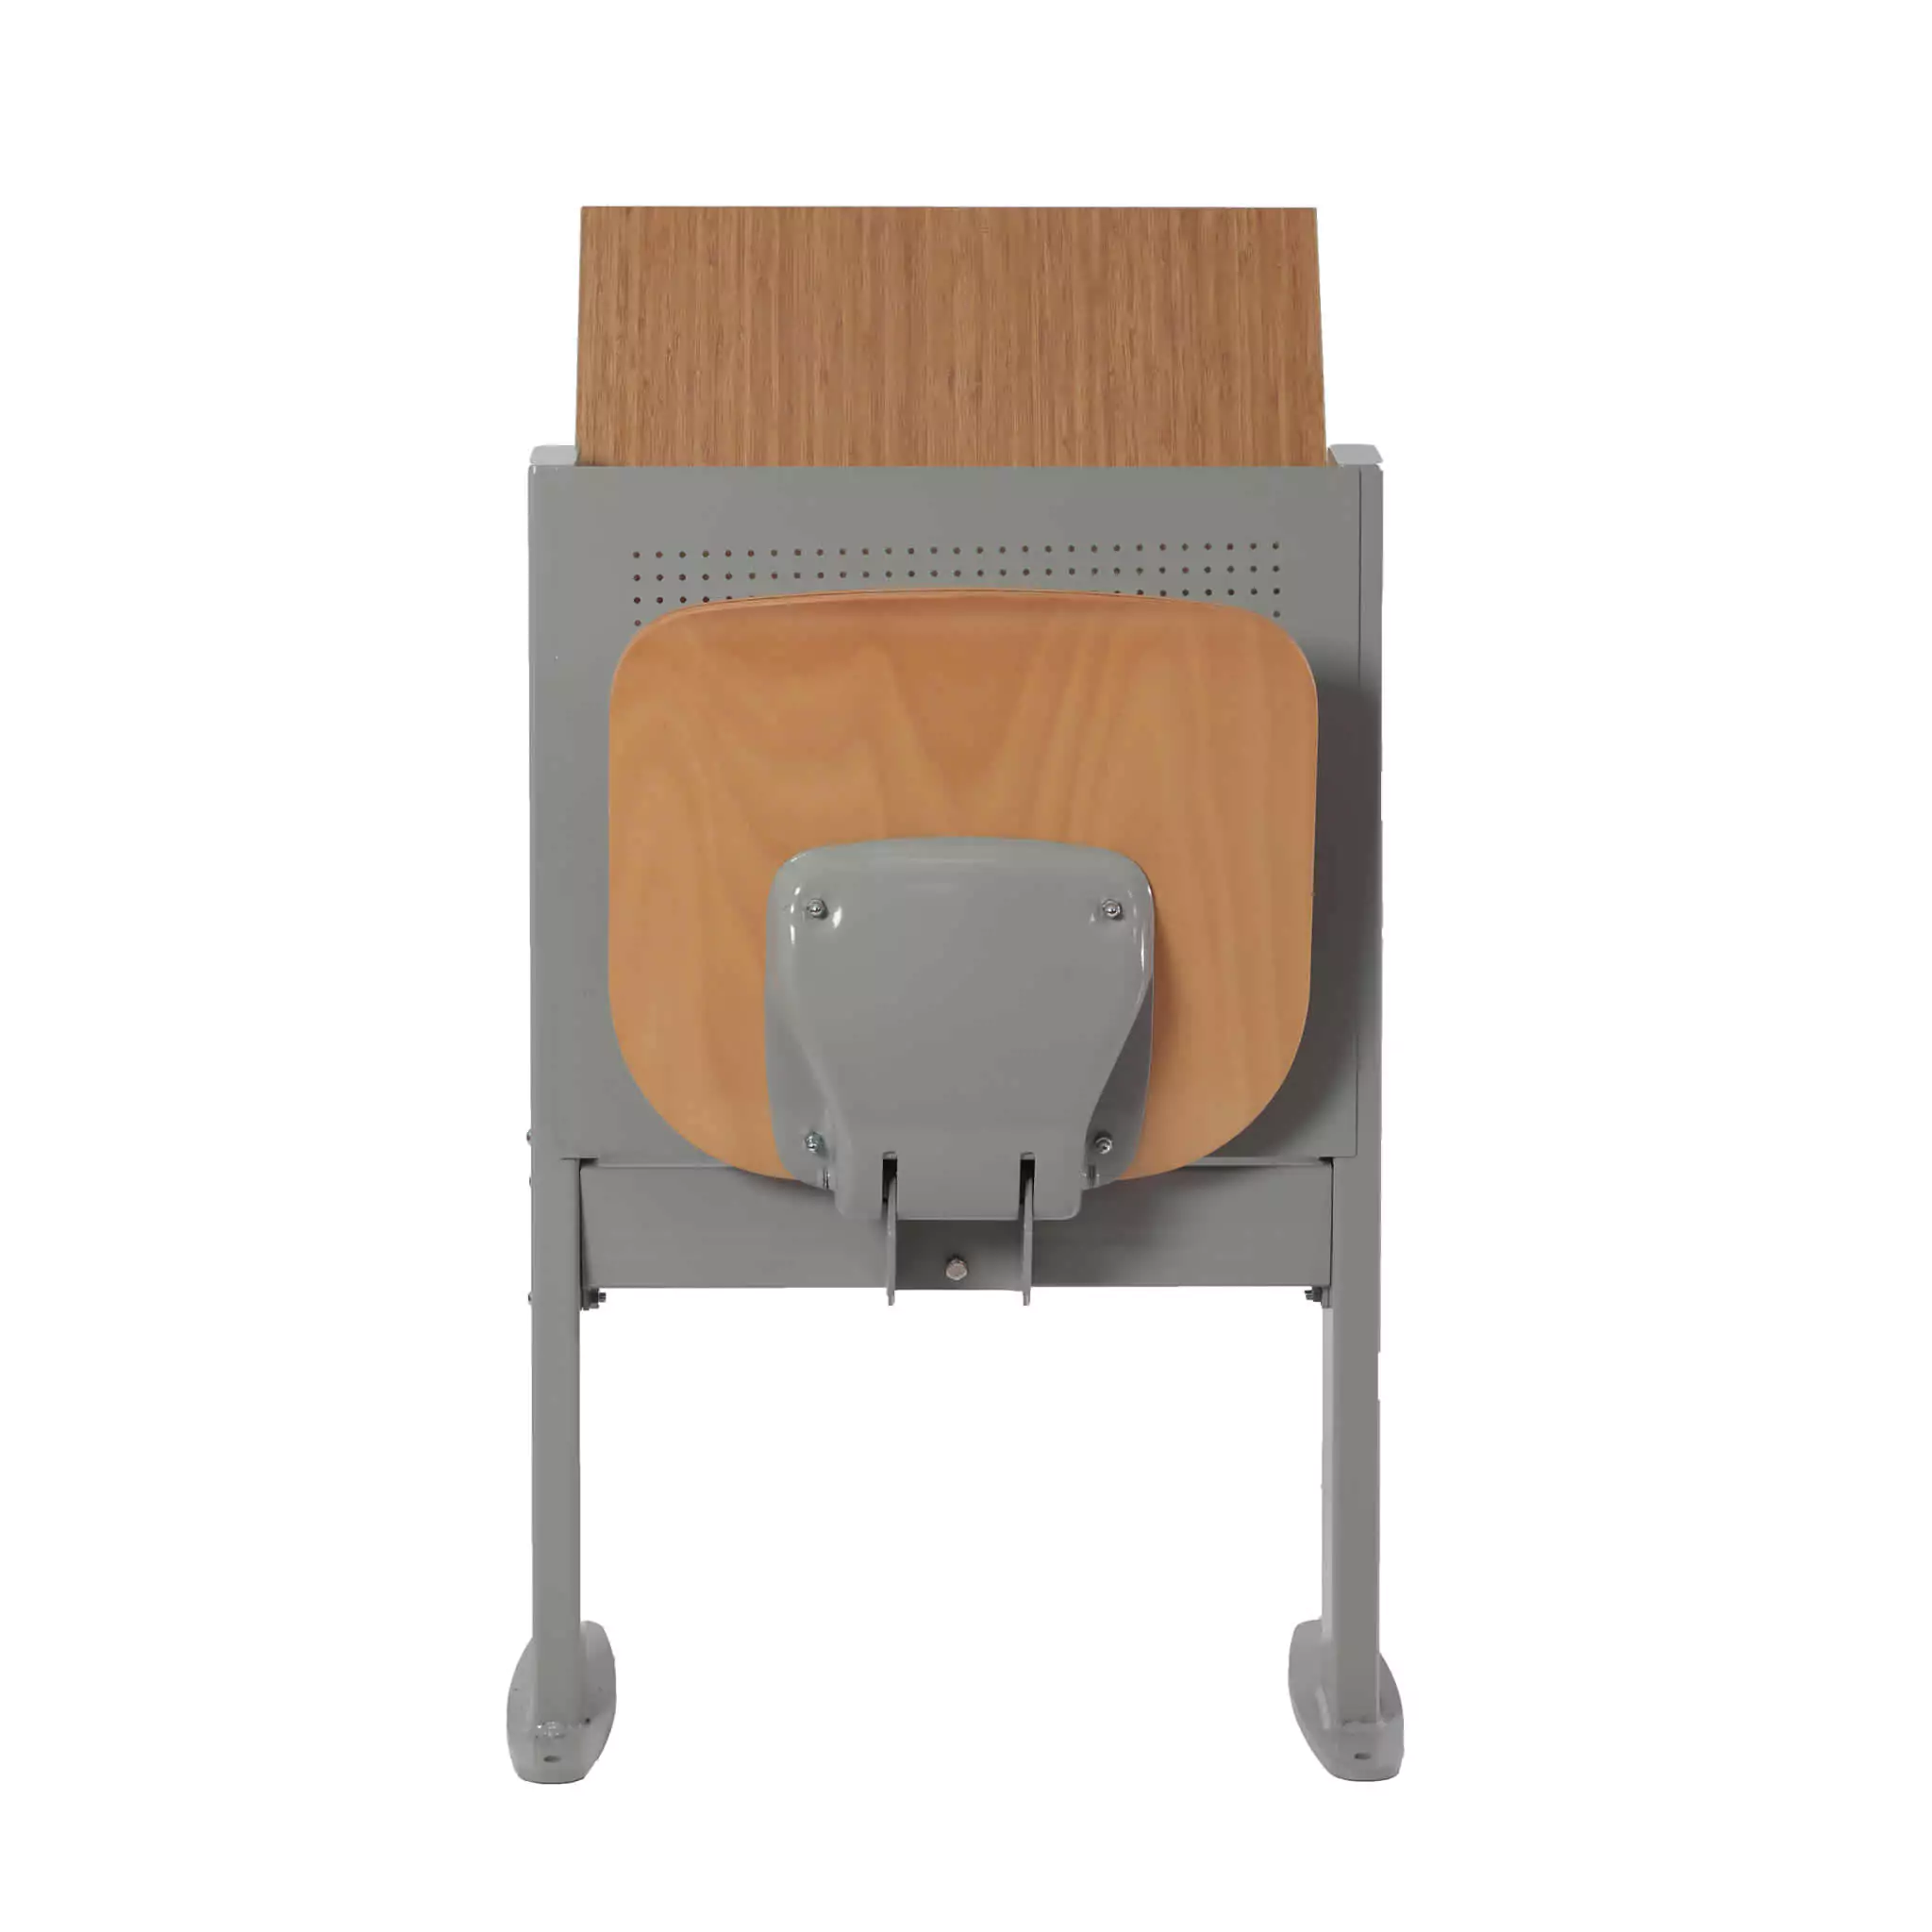 Simko Seating Product School Chair Sodalite